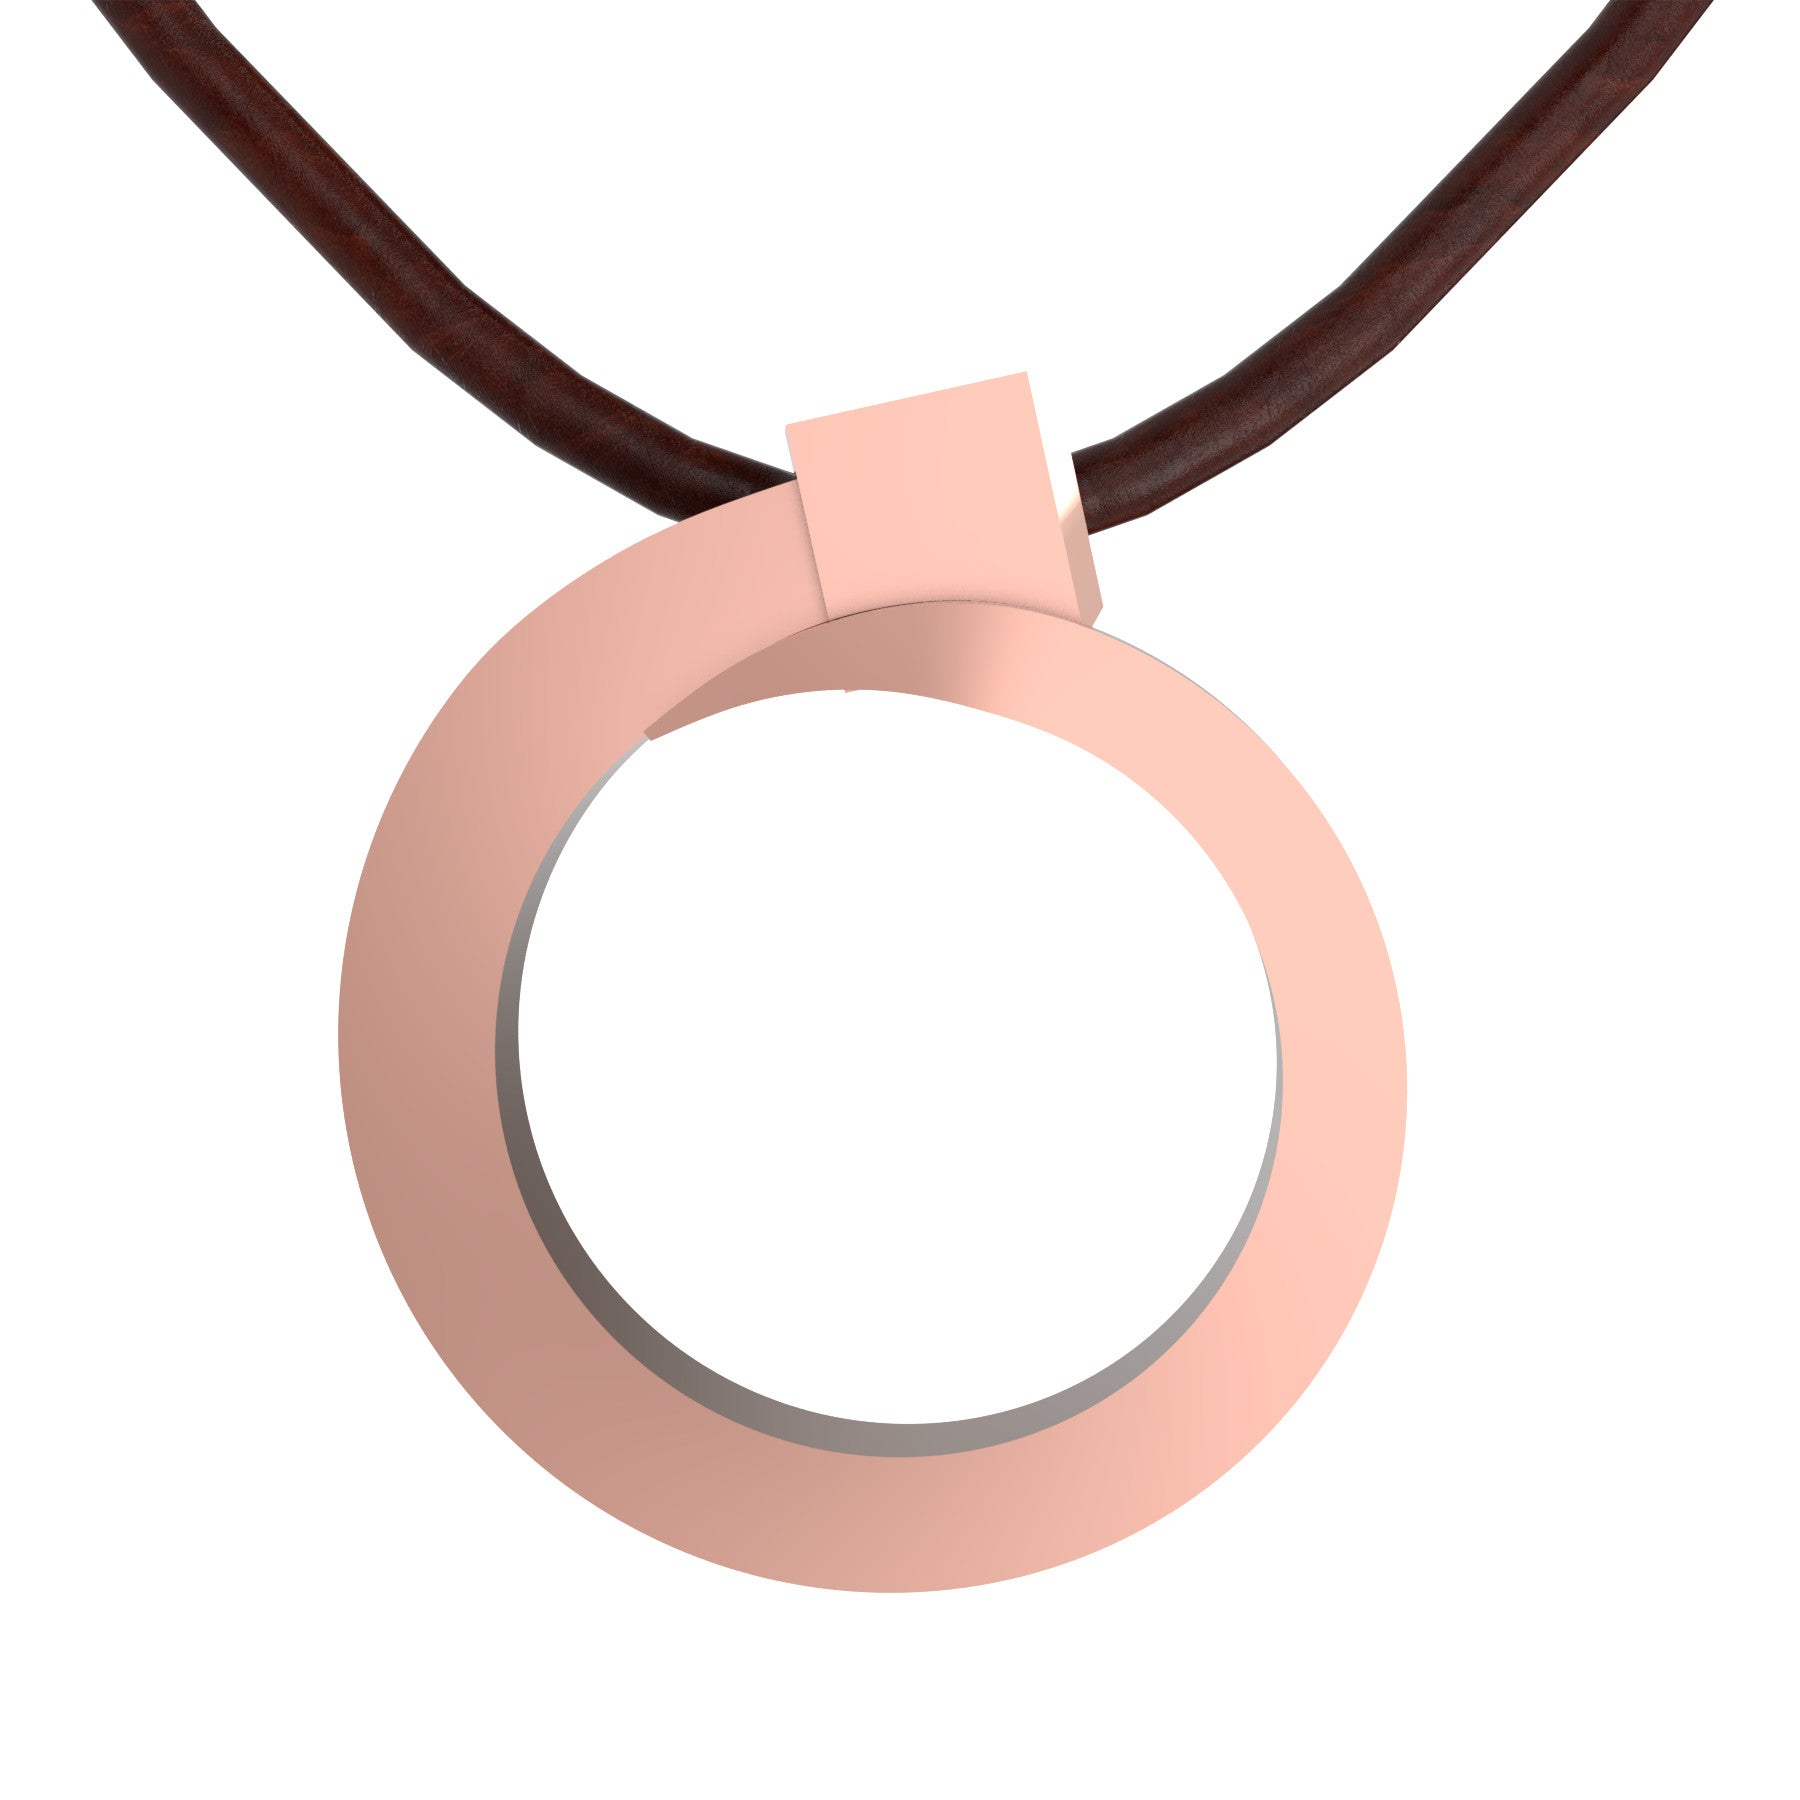 lucky nail pendant, 18 K pink gold, weight about 8,1 g (0.28 oz), width 8 mm max diameter 27,0 mm max